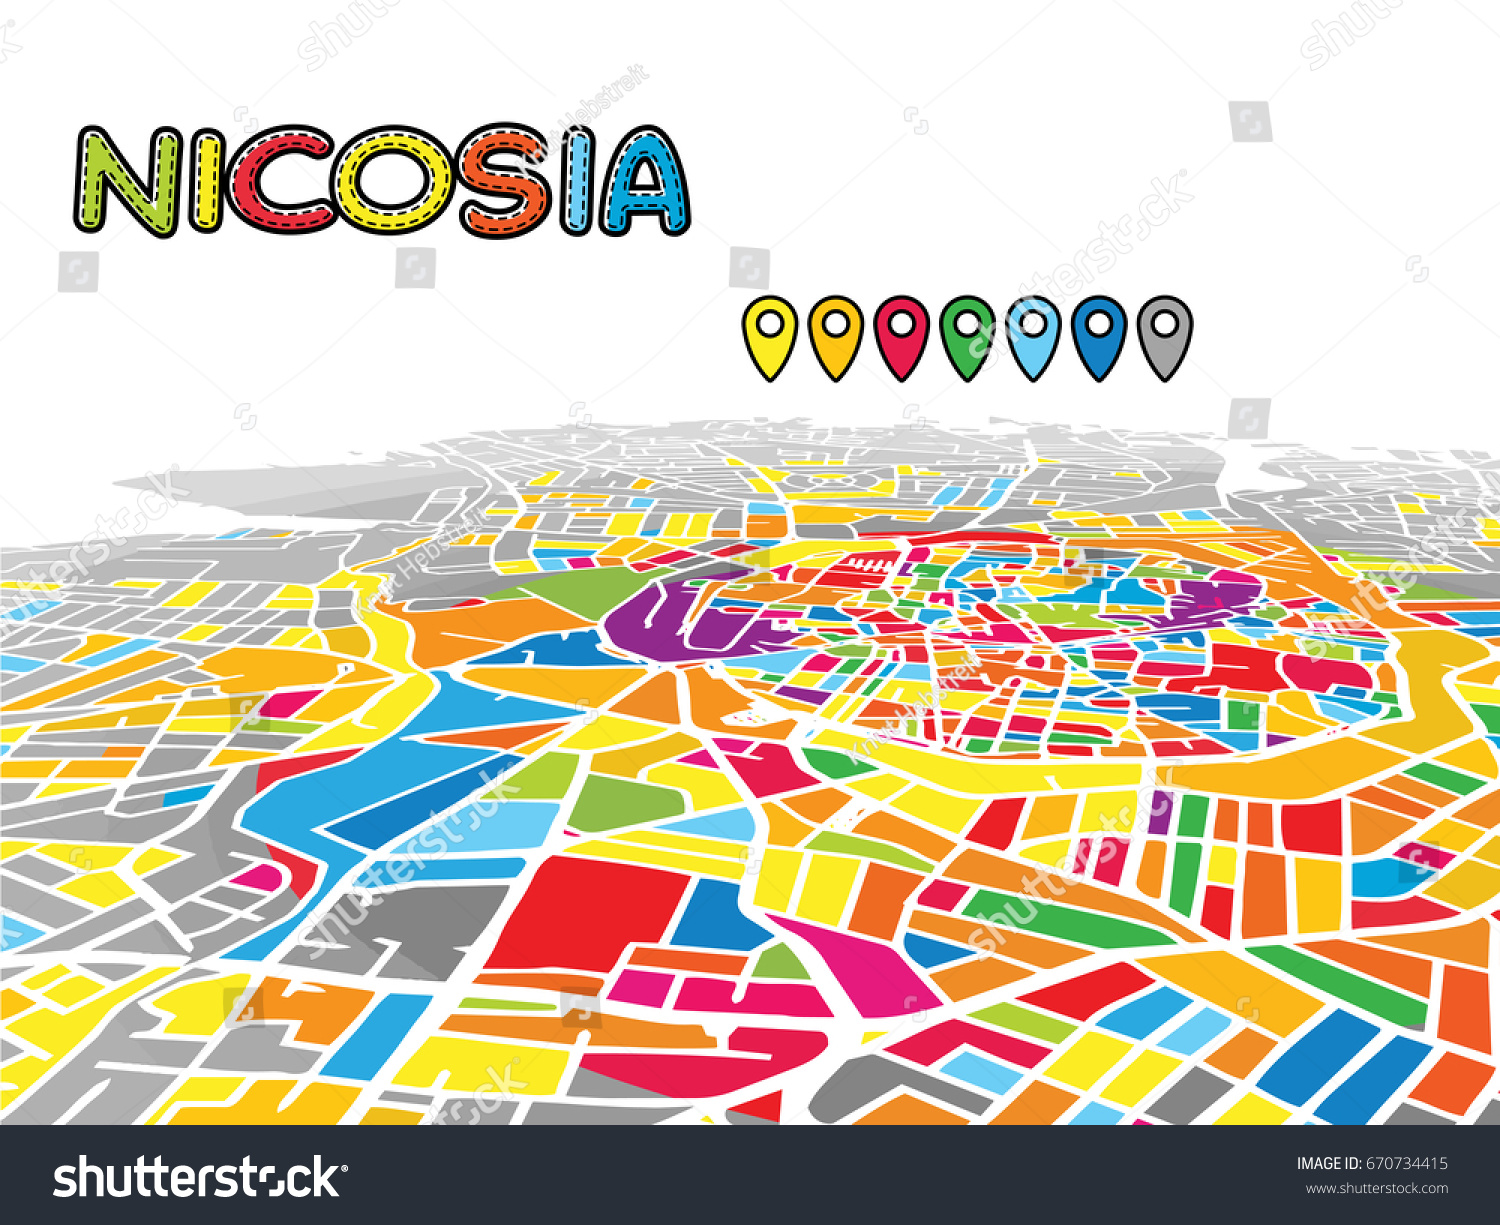 Stock Vector Nicosia Cyprus Downtown D Vector Map Of Famous Streets Bright Foreground Full Of Colors White 670734415 